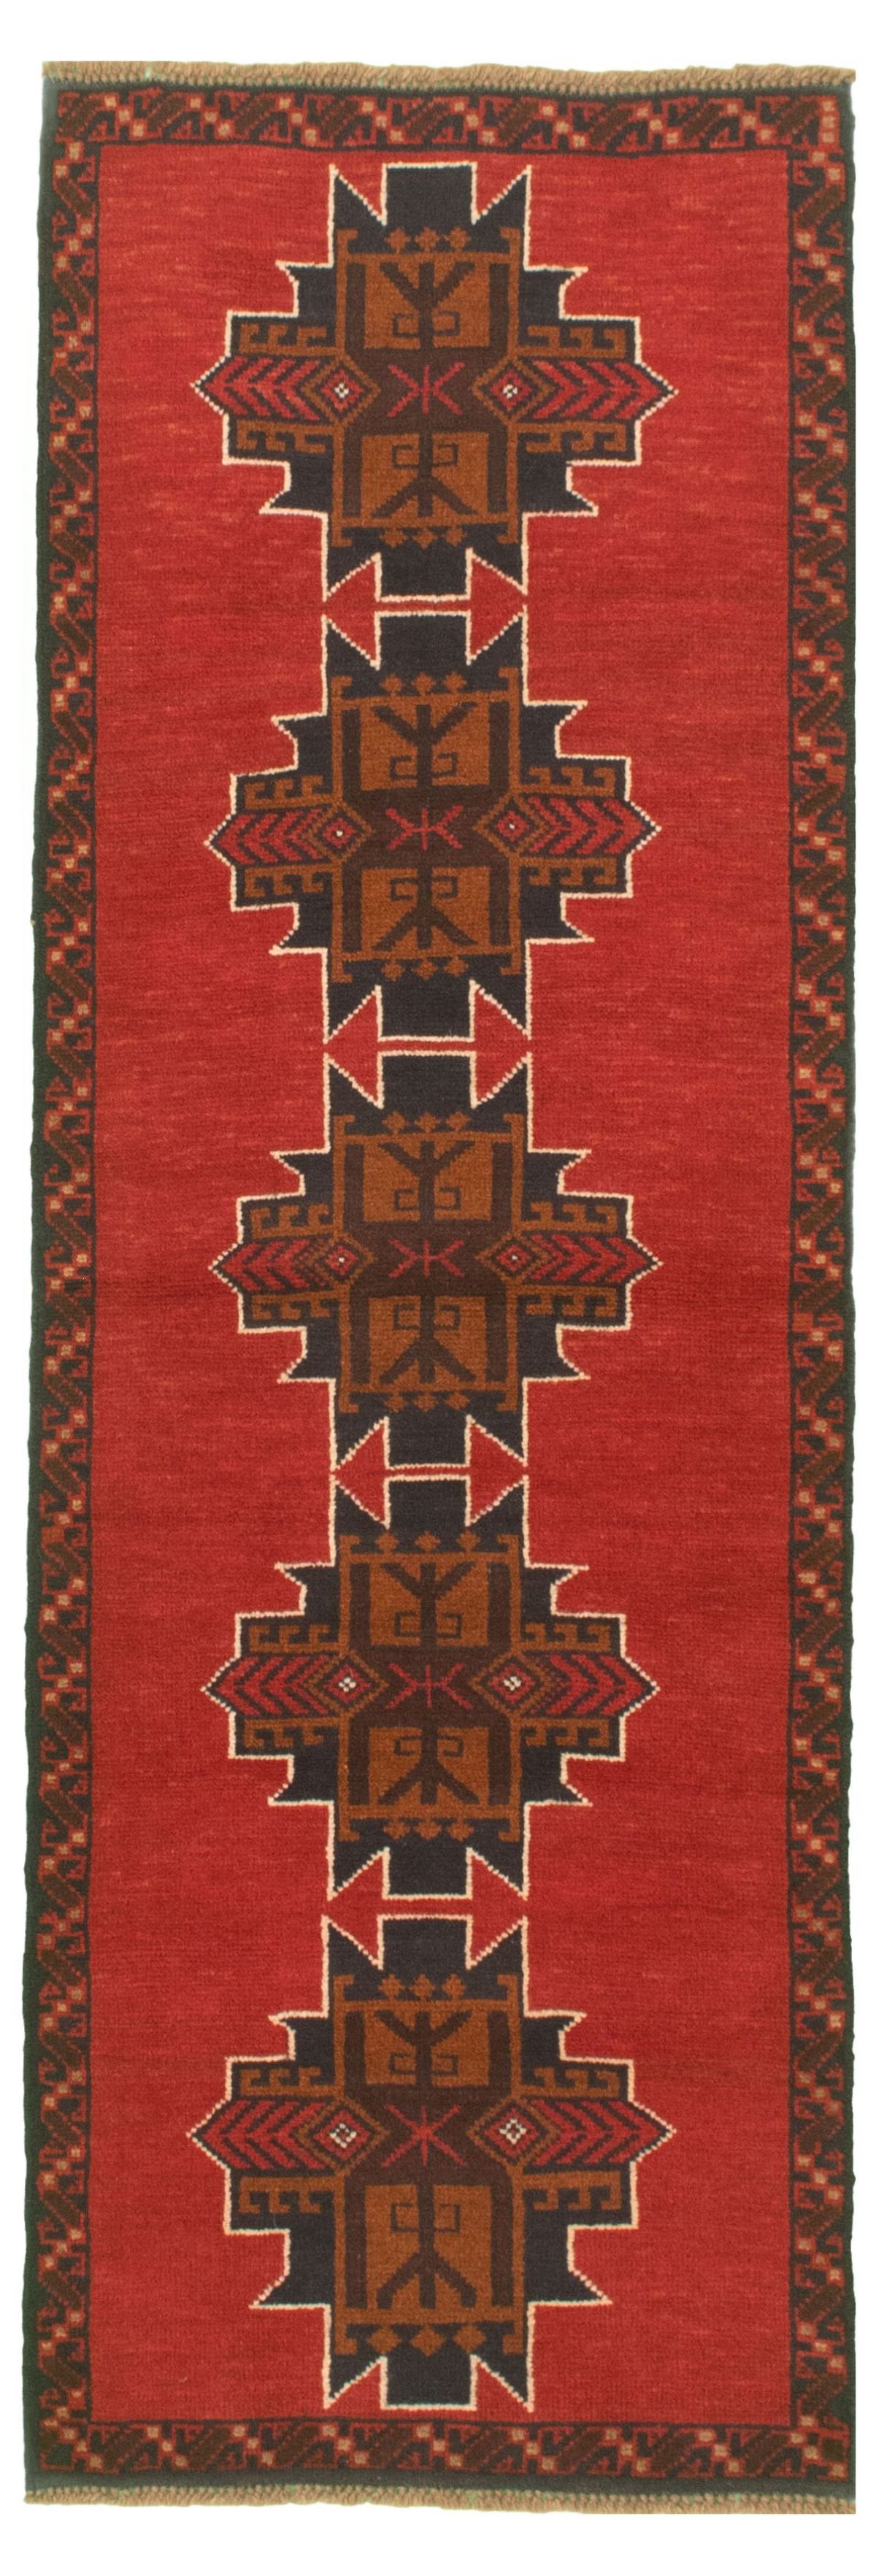 Hand-knotted Baluch Red Wool Rug 2'3" x 6'7" Size: 2'3" x 6'7"  